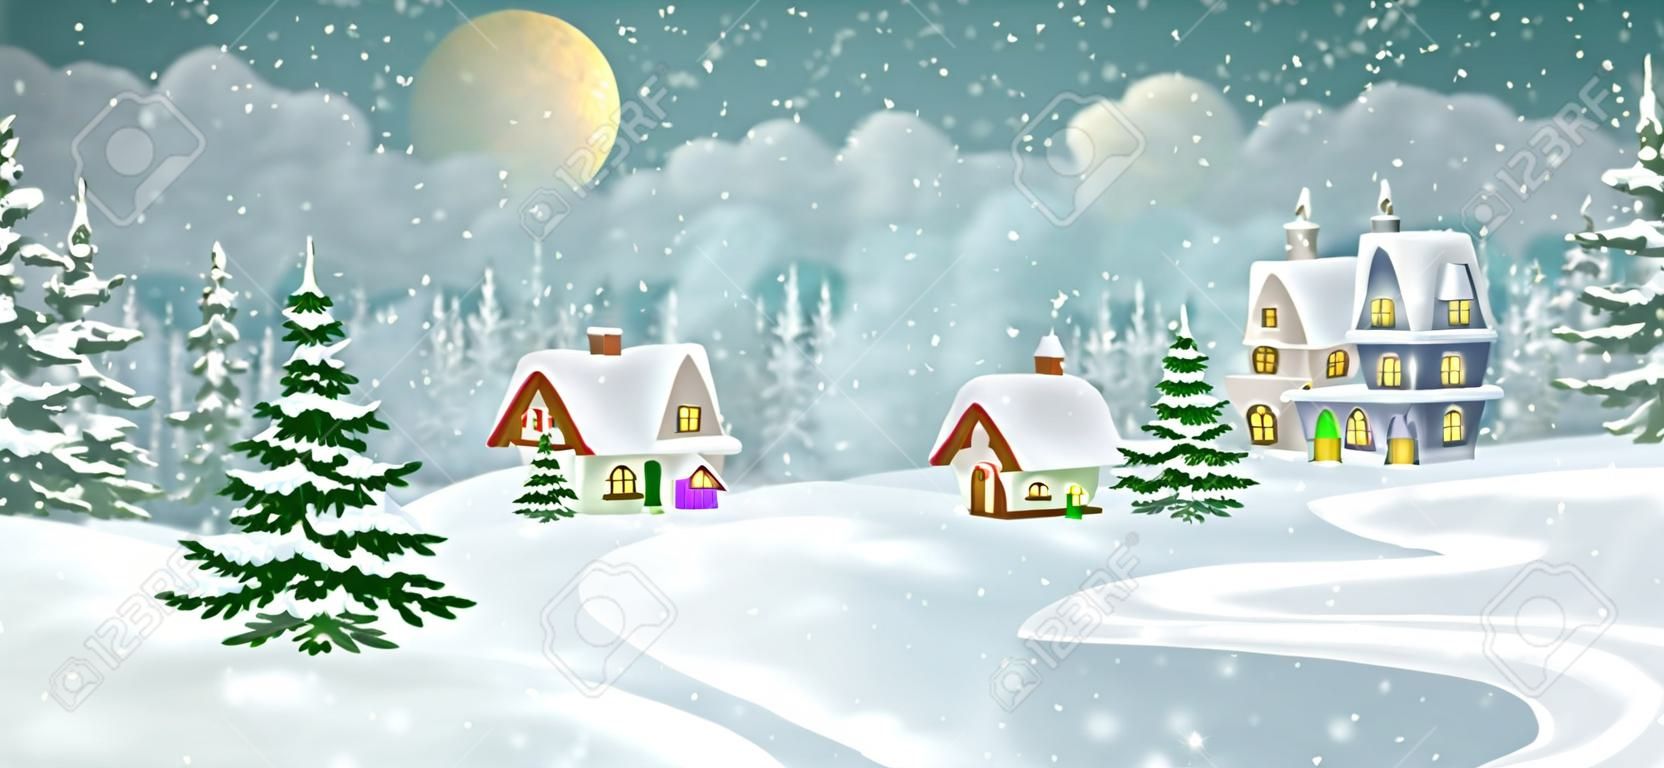 Winter village landscape with pine forest. Small fairy-tale houses covered with snow.